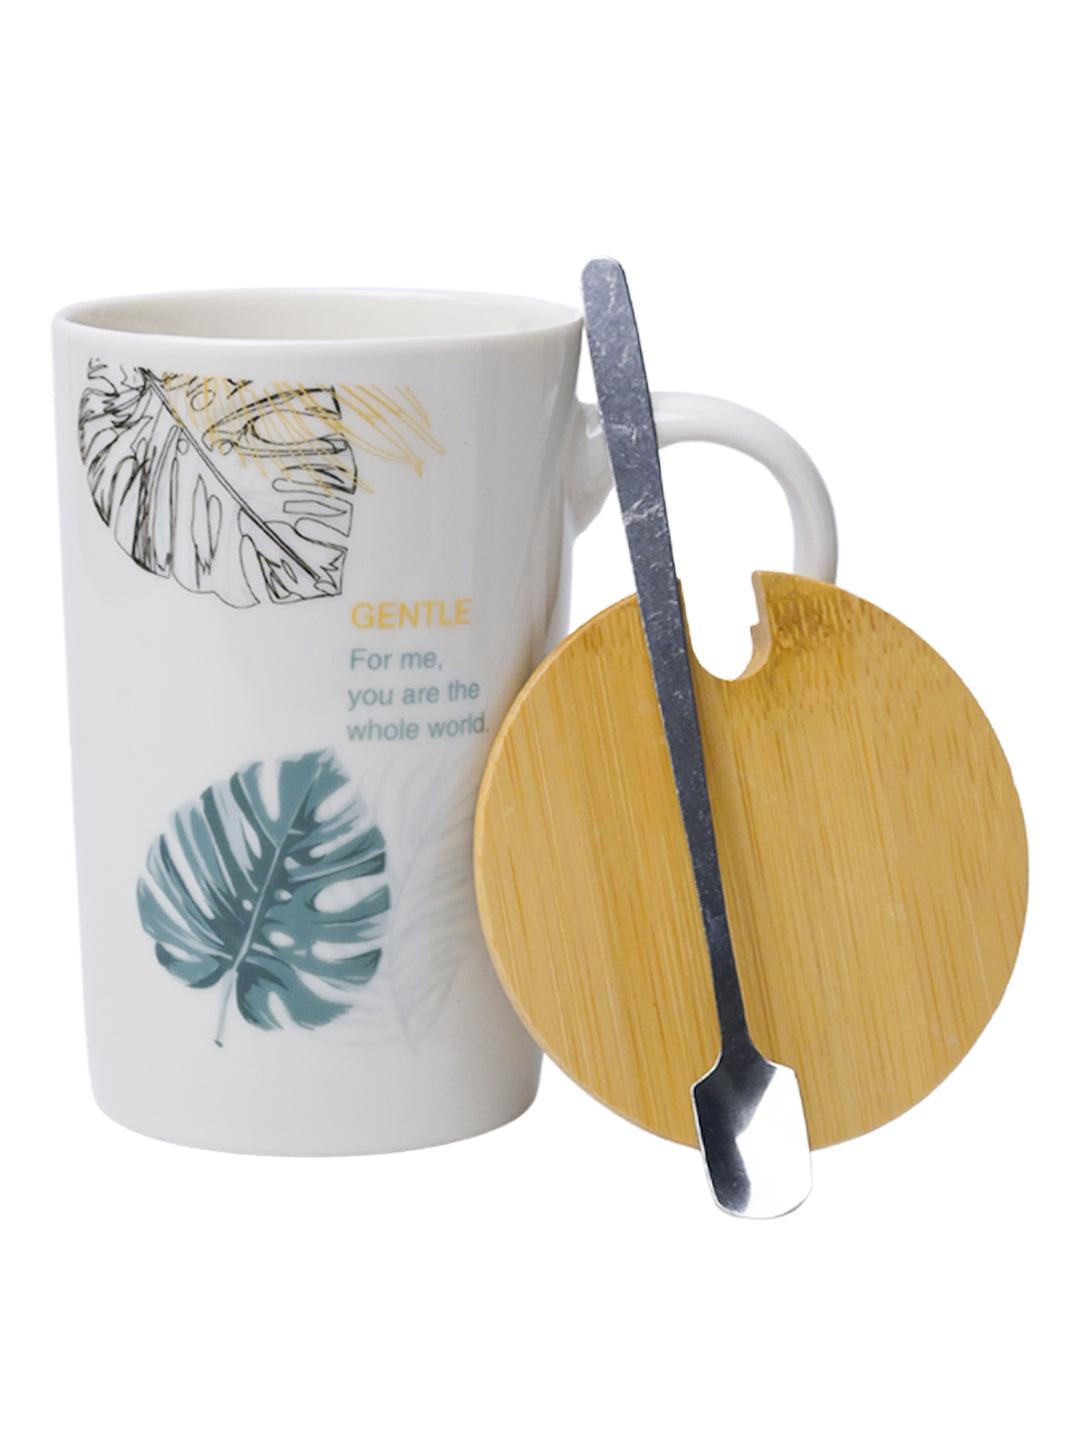 GENTLE' Coffee Mug With Wooden Lid and Spoon - White, 450mL - MARKET99